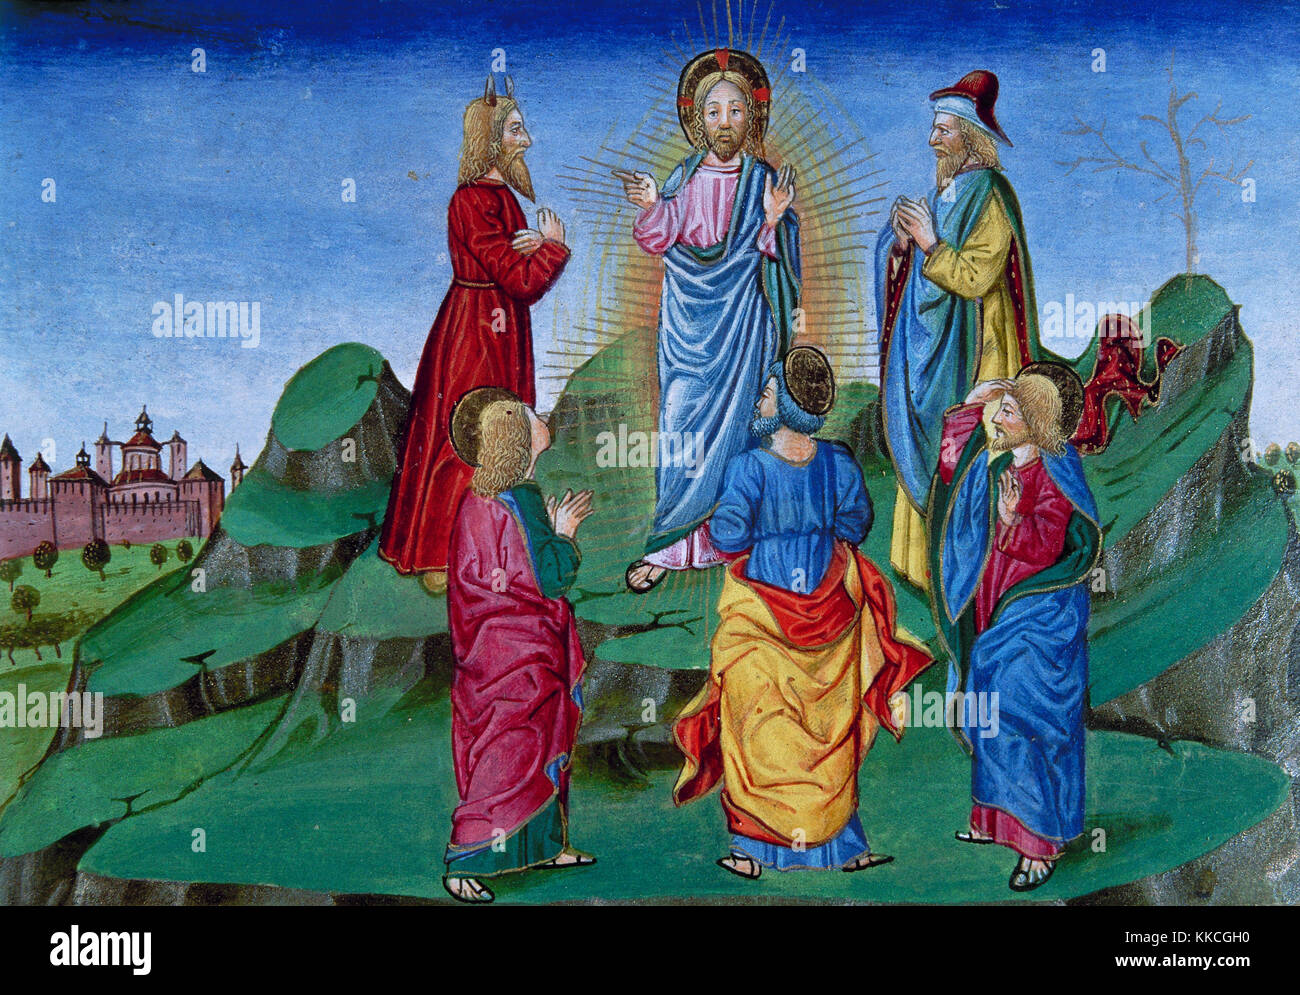 Cristofor de Predis (1440-1486). Italian miniaturist. Jesus goes to the Mountain with Peter, James and John. He is transfigured with Moses and  Elijah. Codex De Predis. (1476). Royal Library. Turin. Italy. Stock Photo